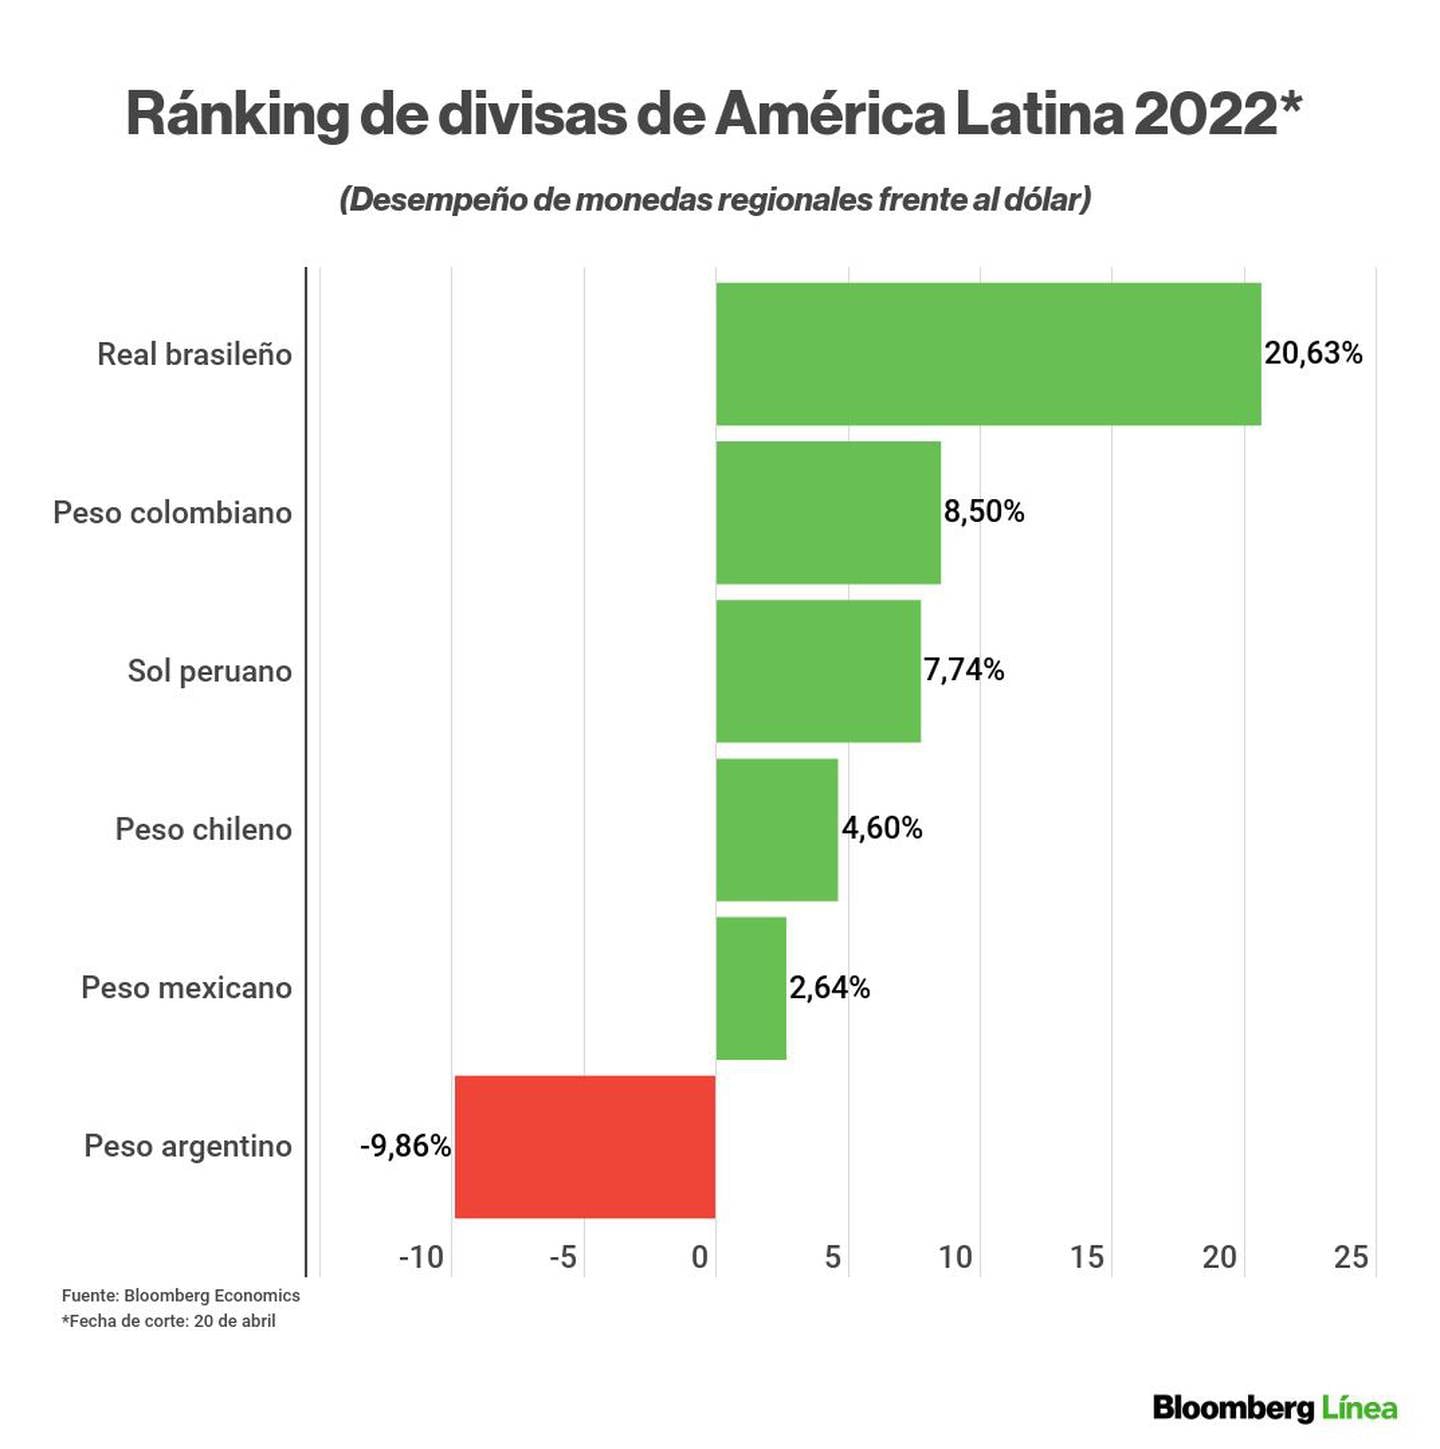 Dollar today in emerging and Latin American countries: ranking for the year to April 20, 2022.